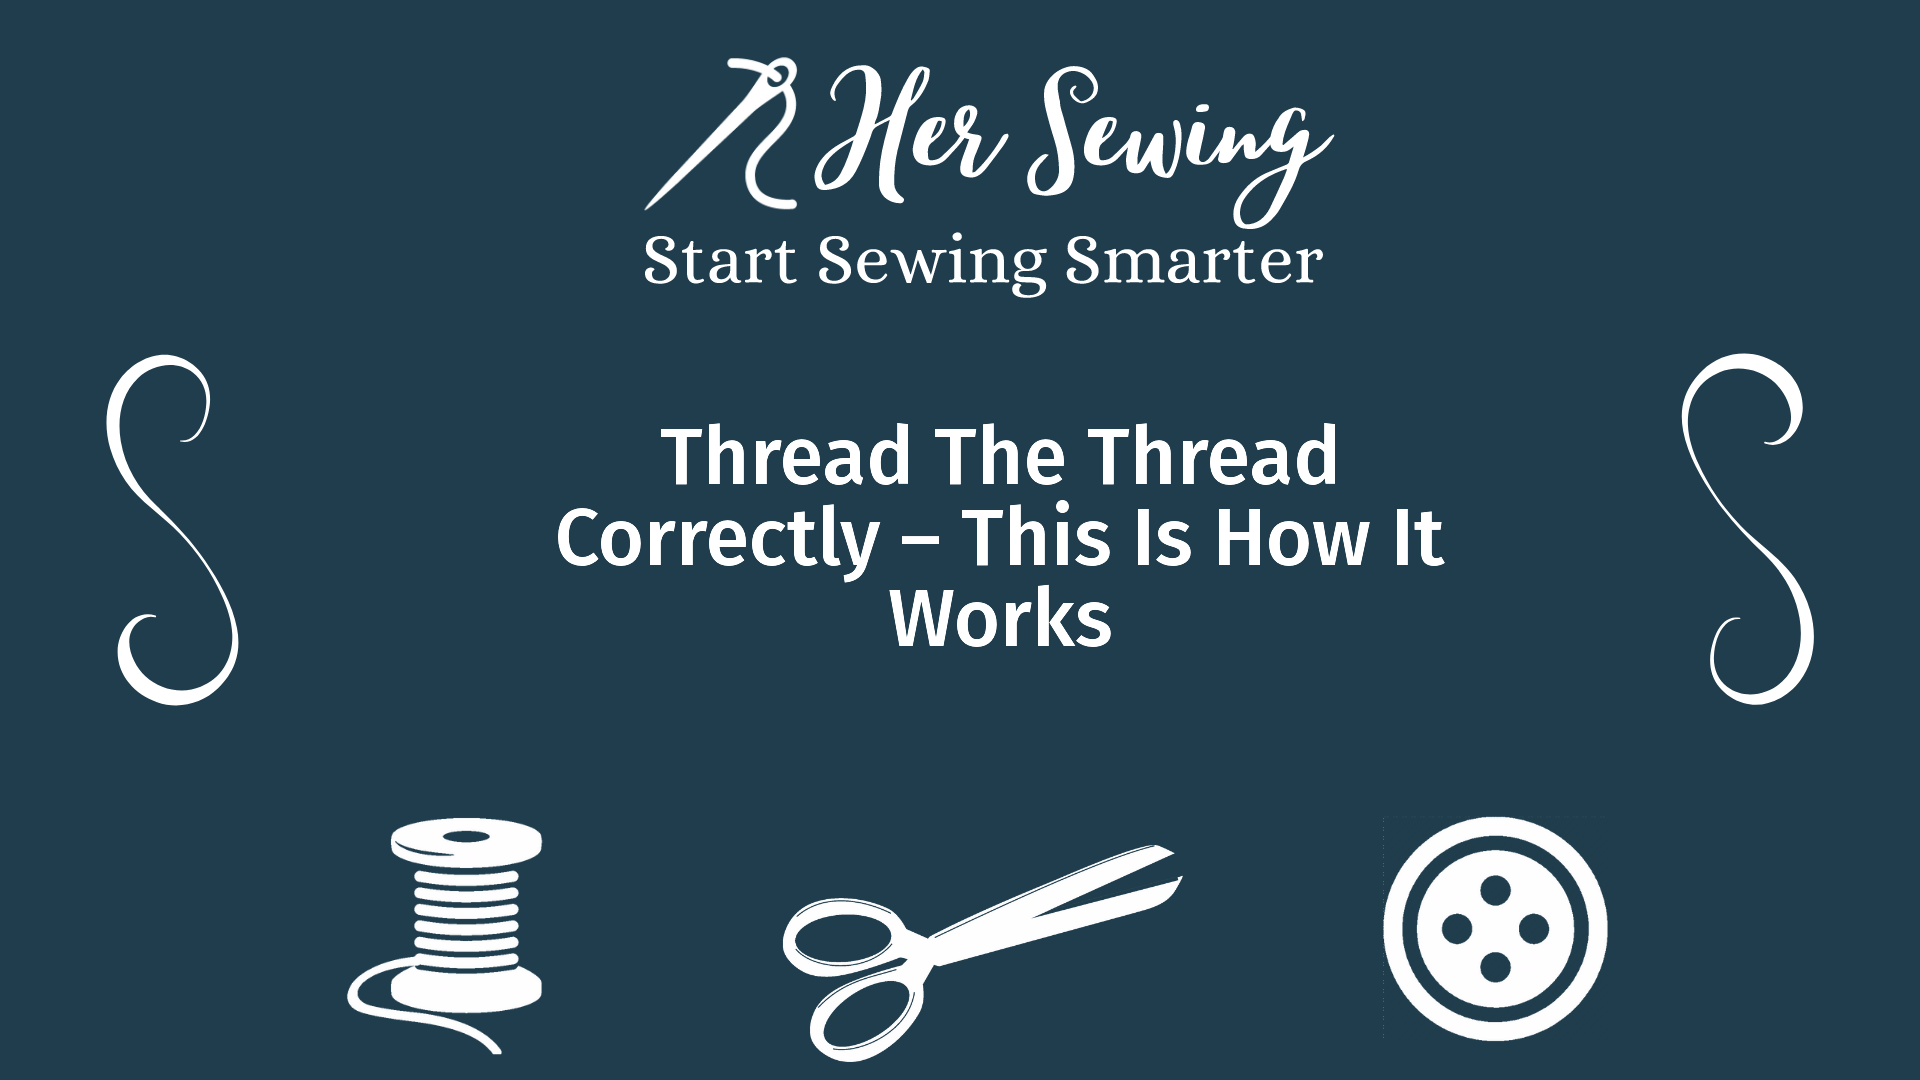 Thread The Thread Correctly – This Is How It Works